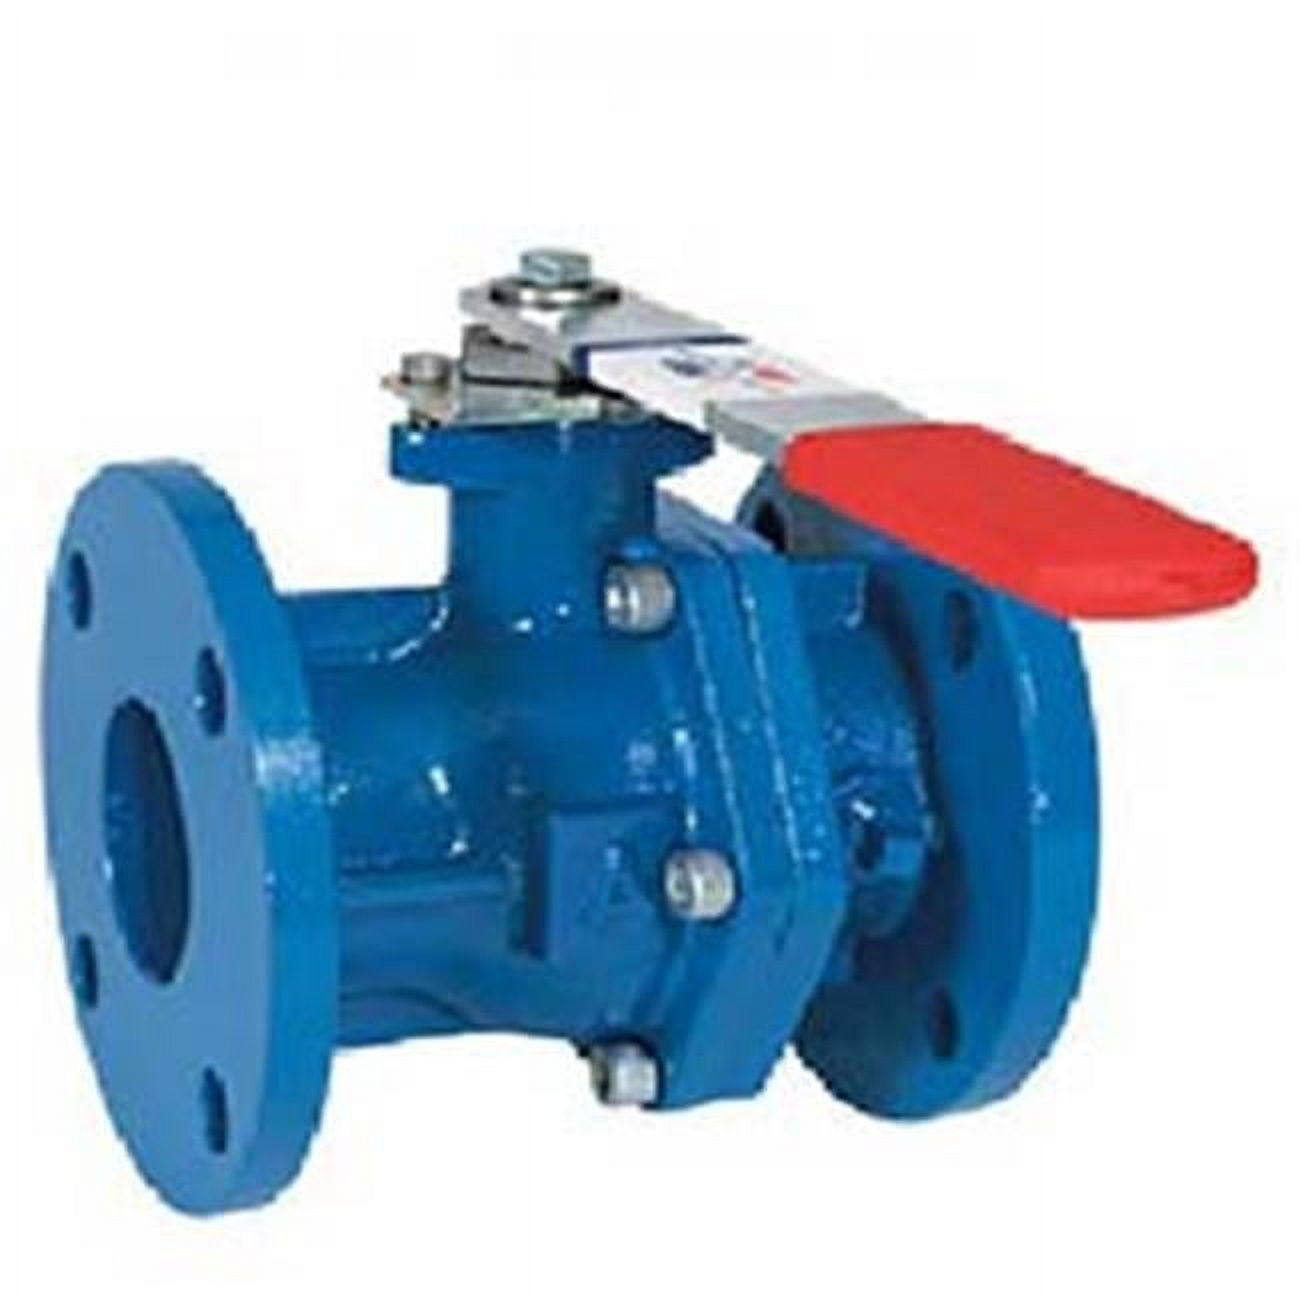 Picture of American Valve 3700 6 6 in. Cast Iron Flanged Ball Valve